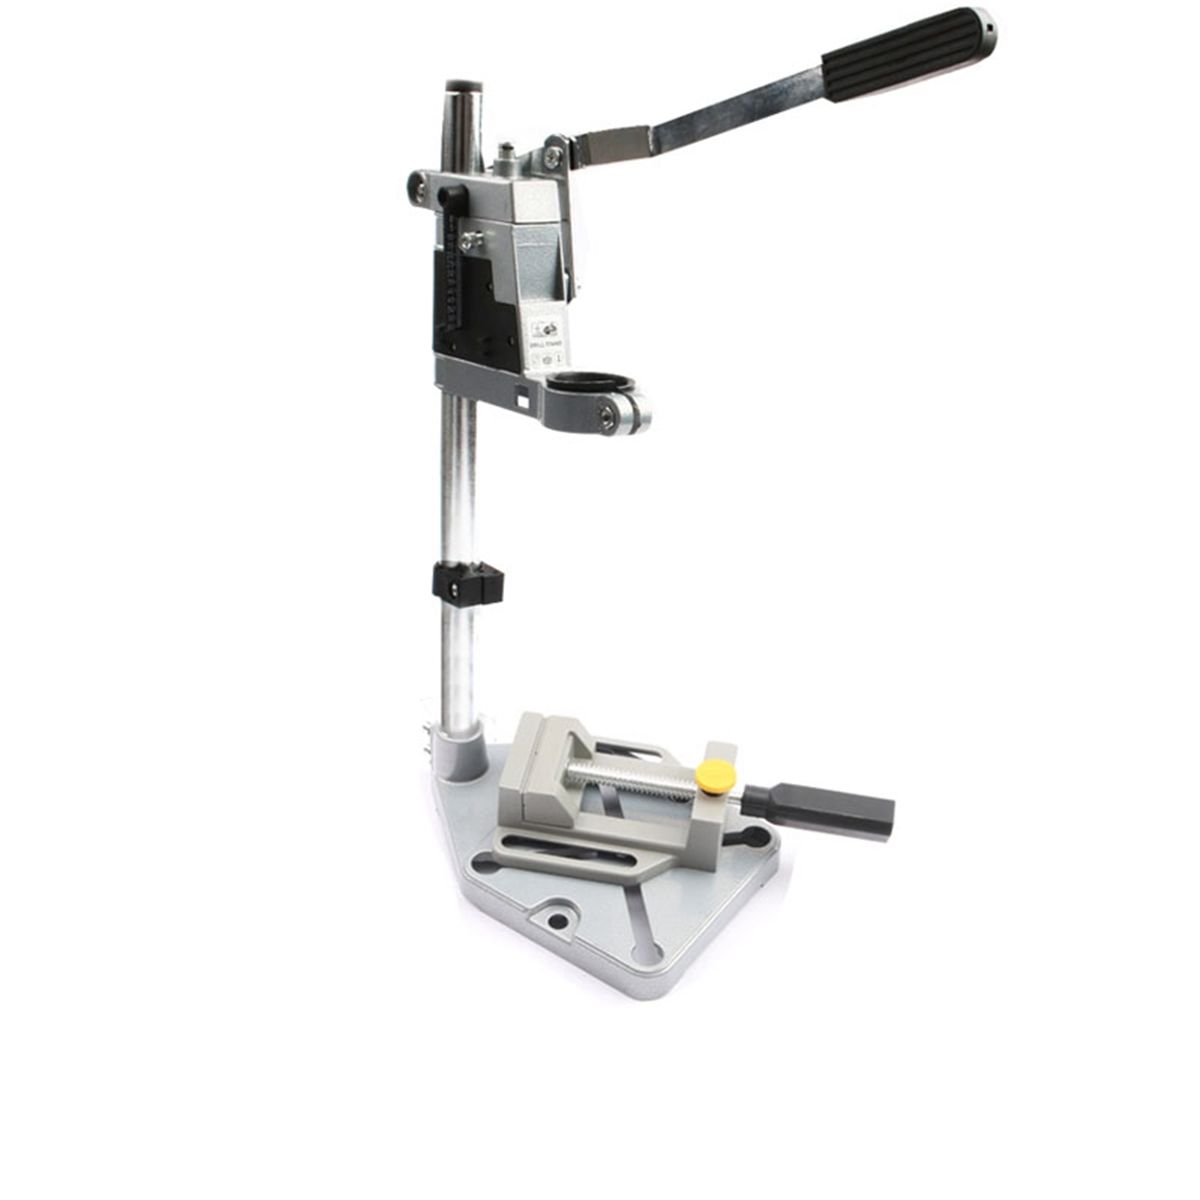 Aluminum-Drill-Stand-Holding-Holder-Bracket-Single-Head-Rack-Drill-Holder-Grinder-Accessories-For-Wo-1760076